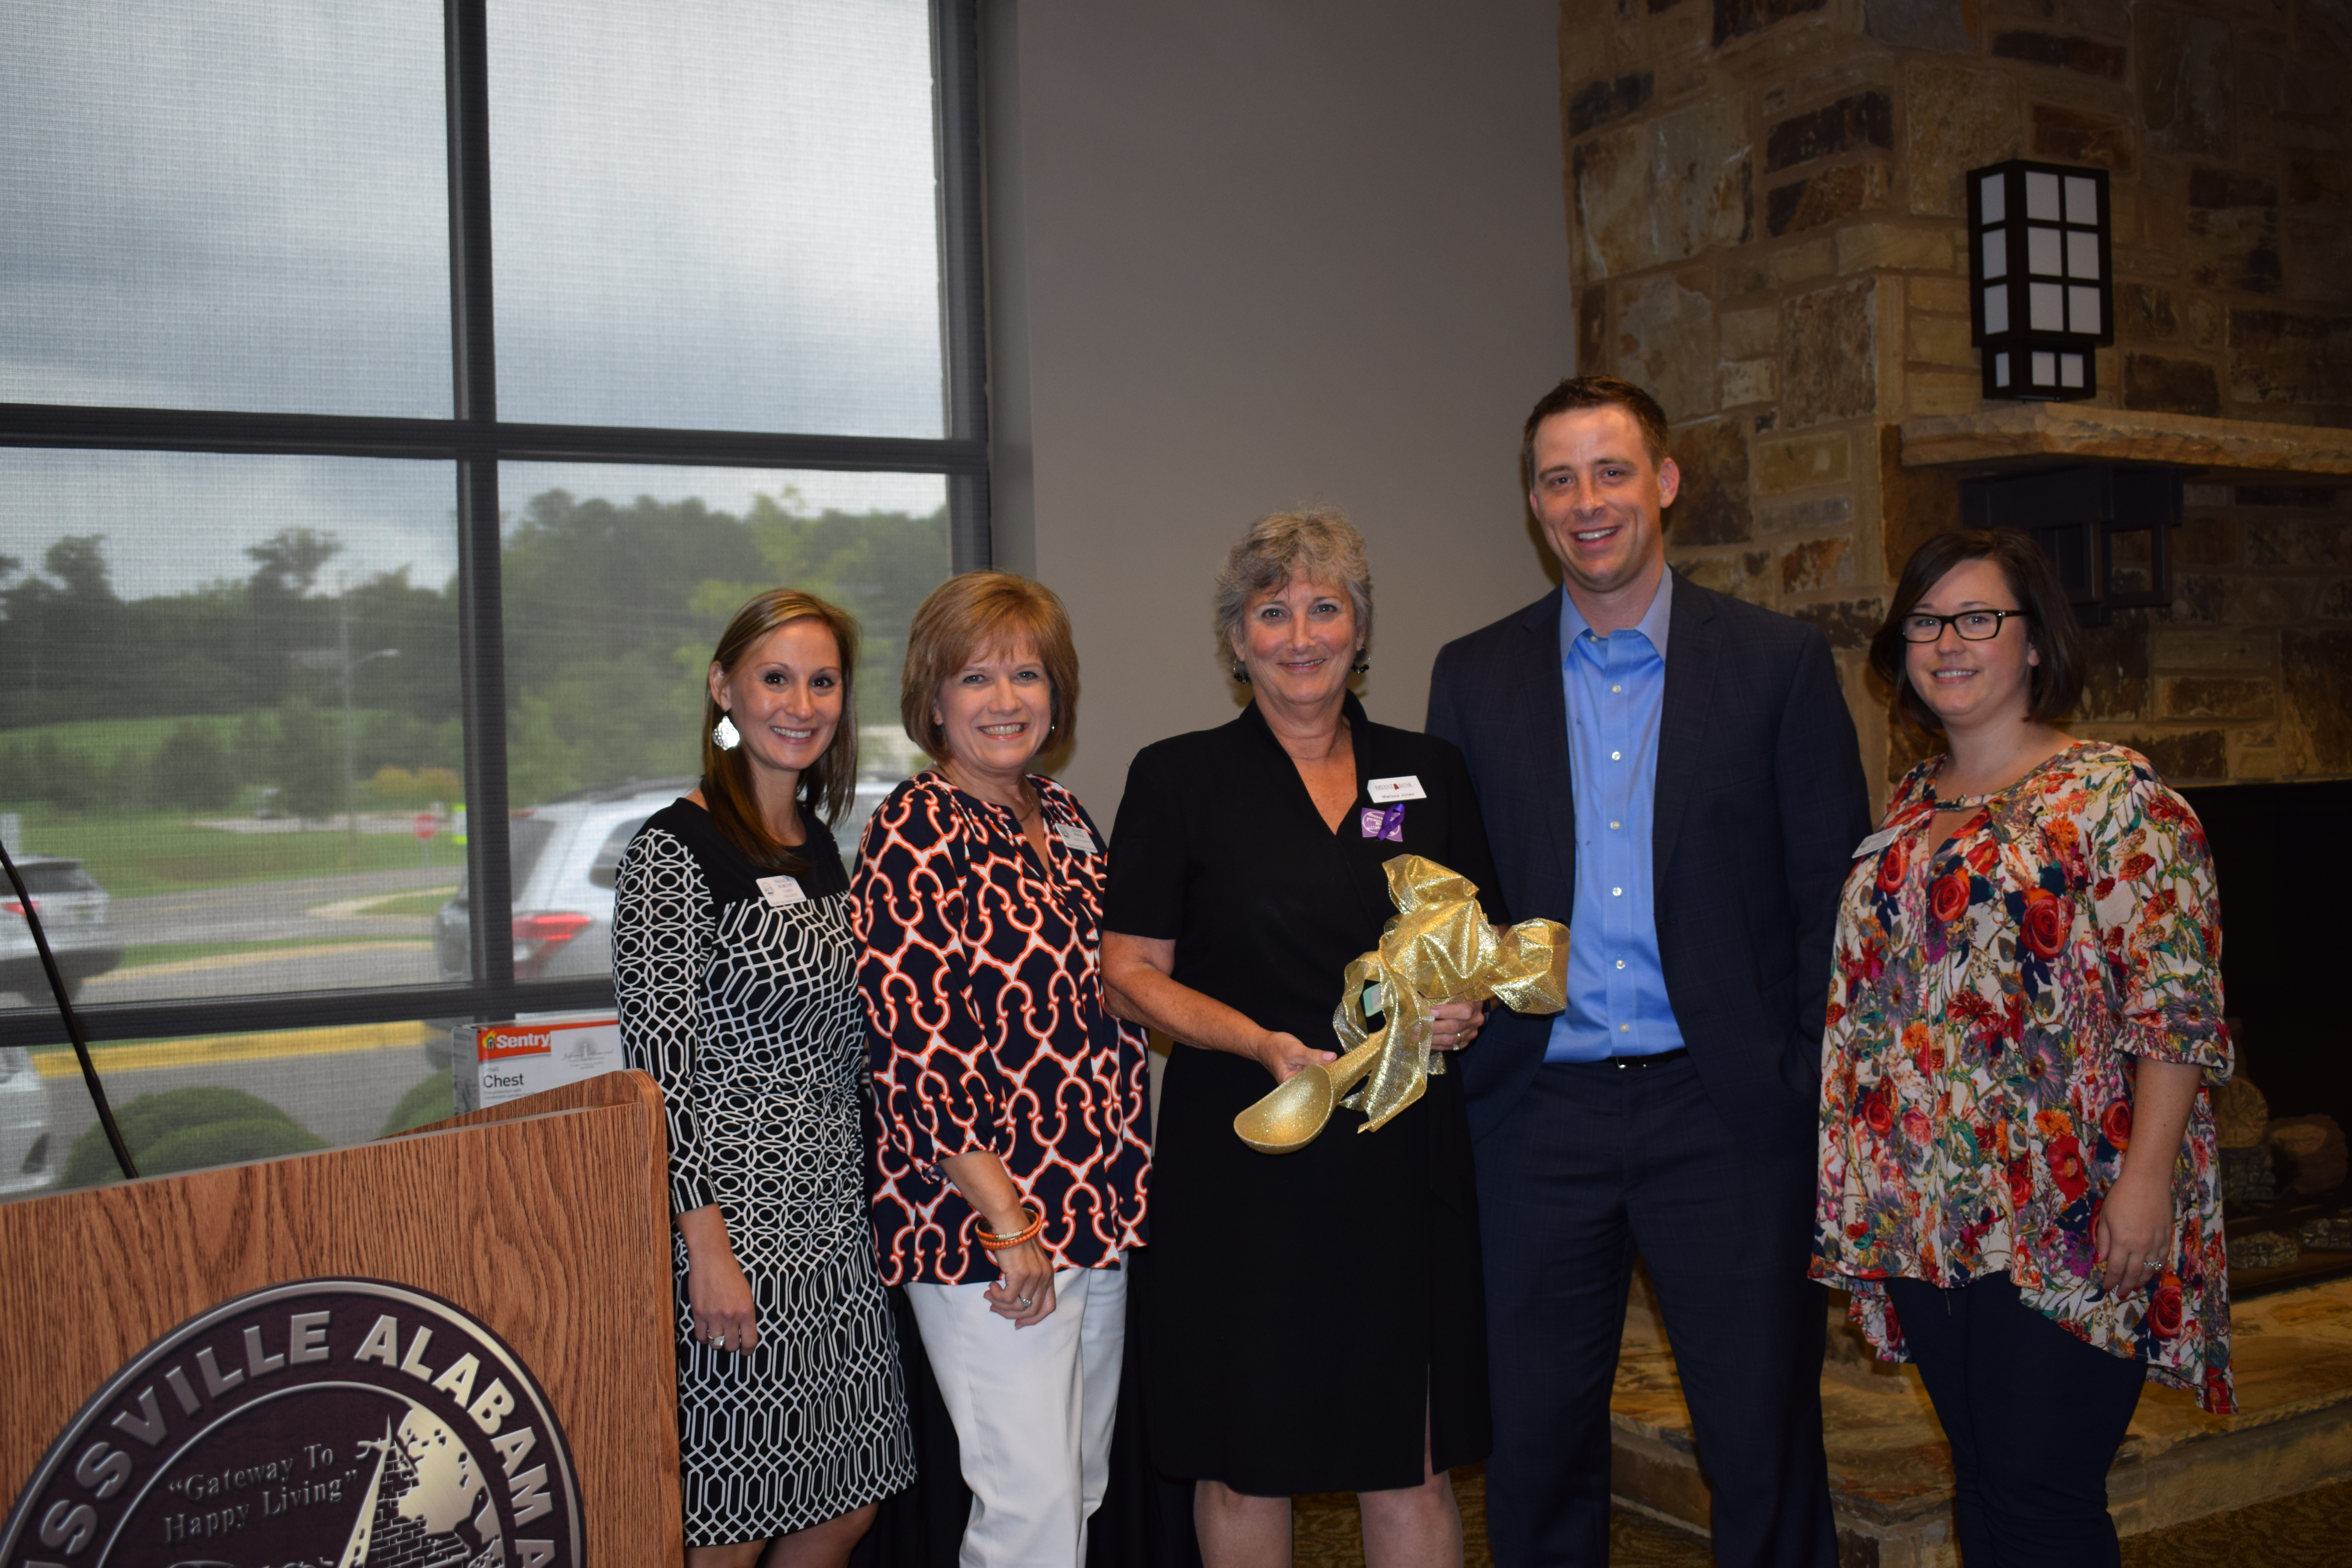 TACC presents first ever Golden Scoop Award following Ice Cream Social 